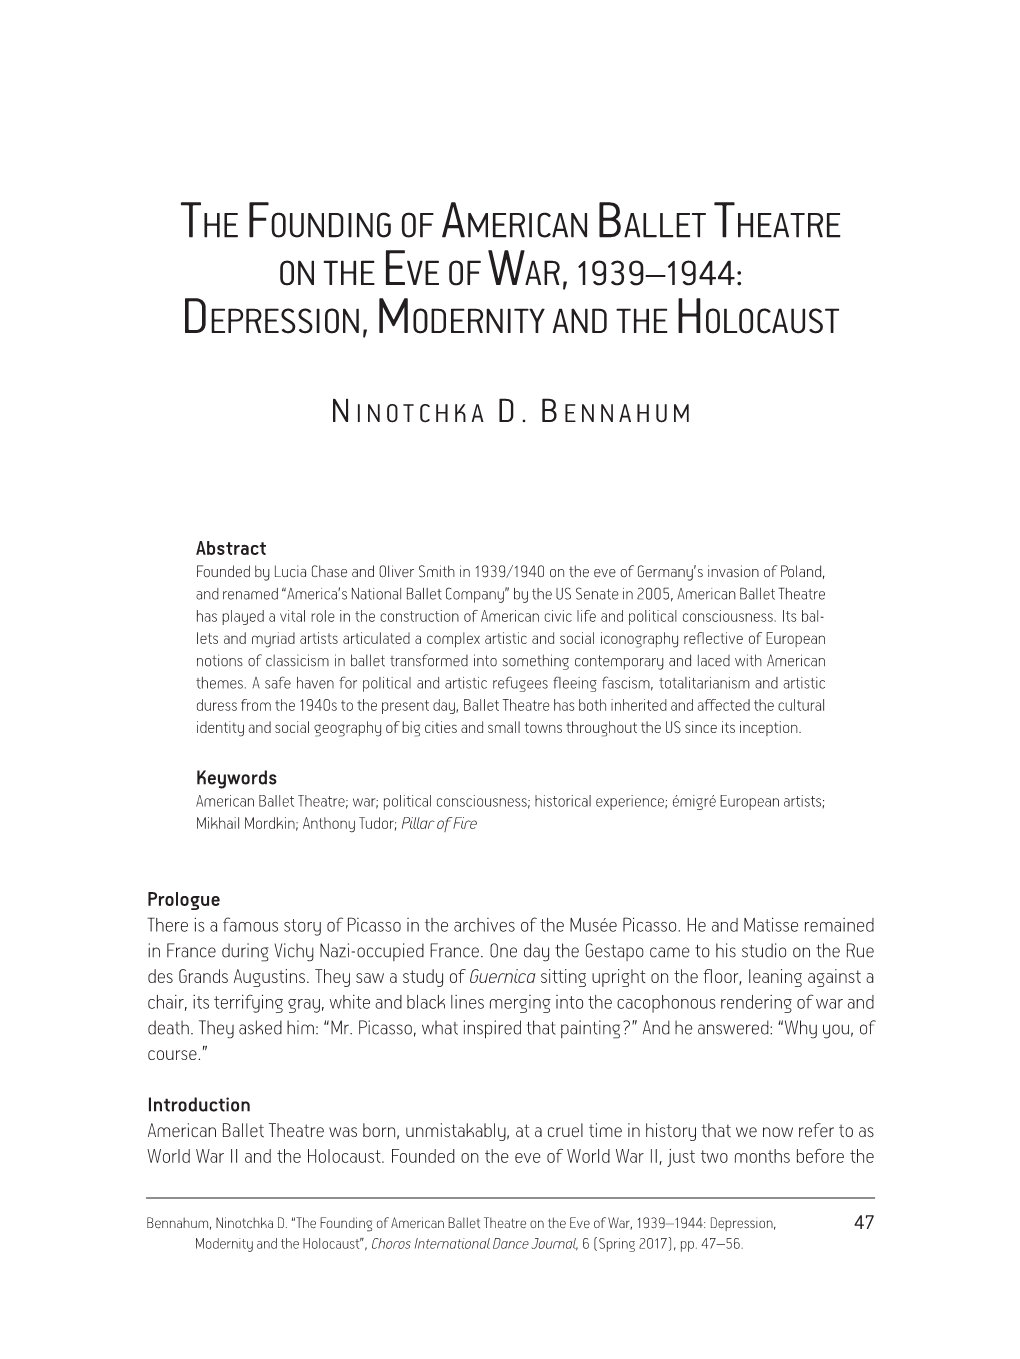 The Founding of American Ballet Theatre on the Eve of War, 1939–1944: Depression, Modernity and the Holocaust